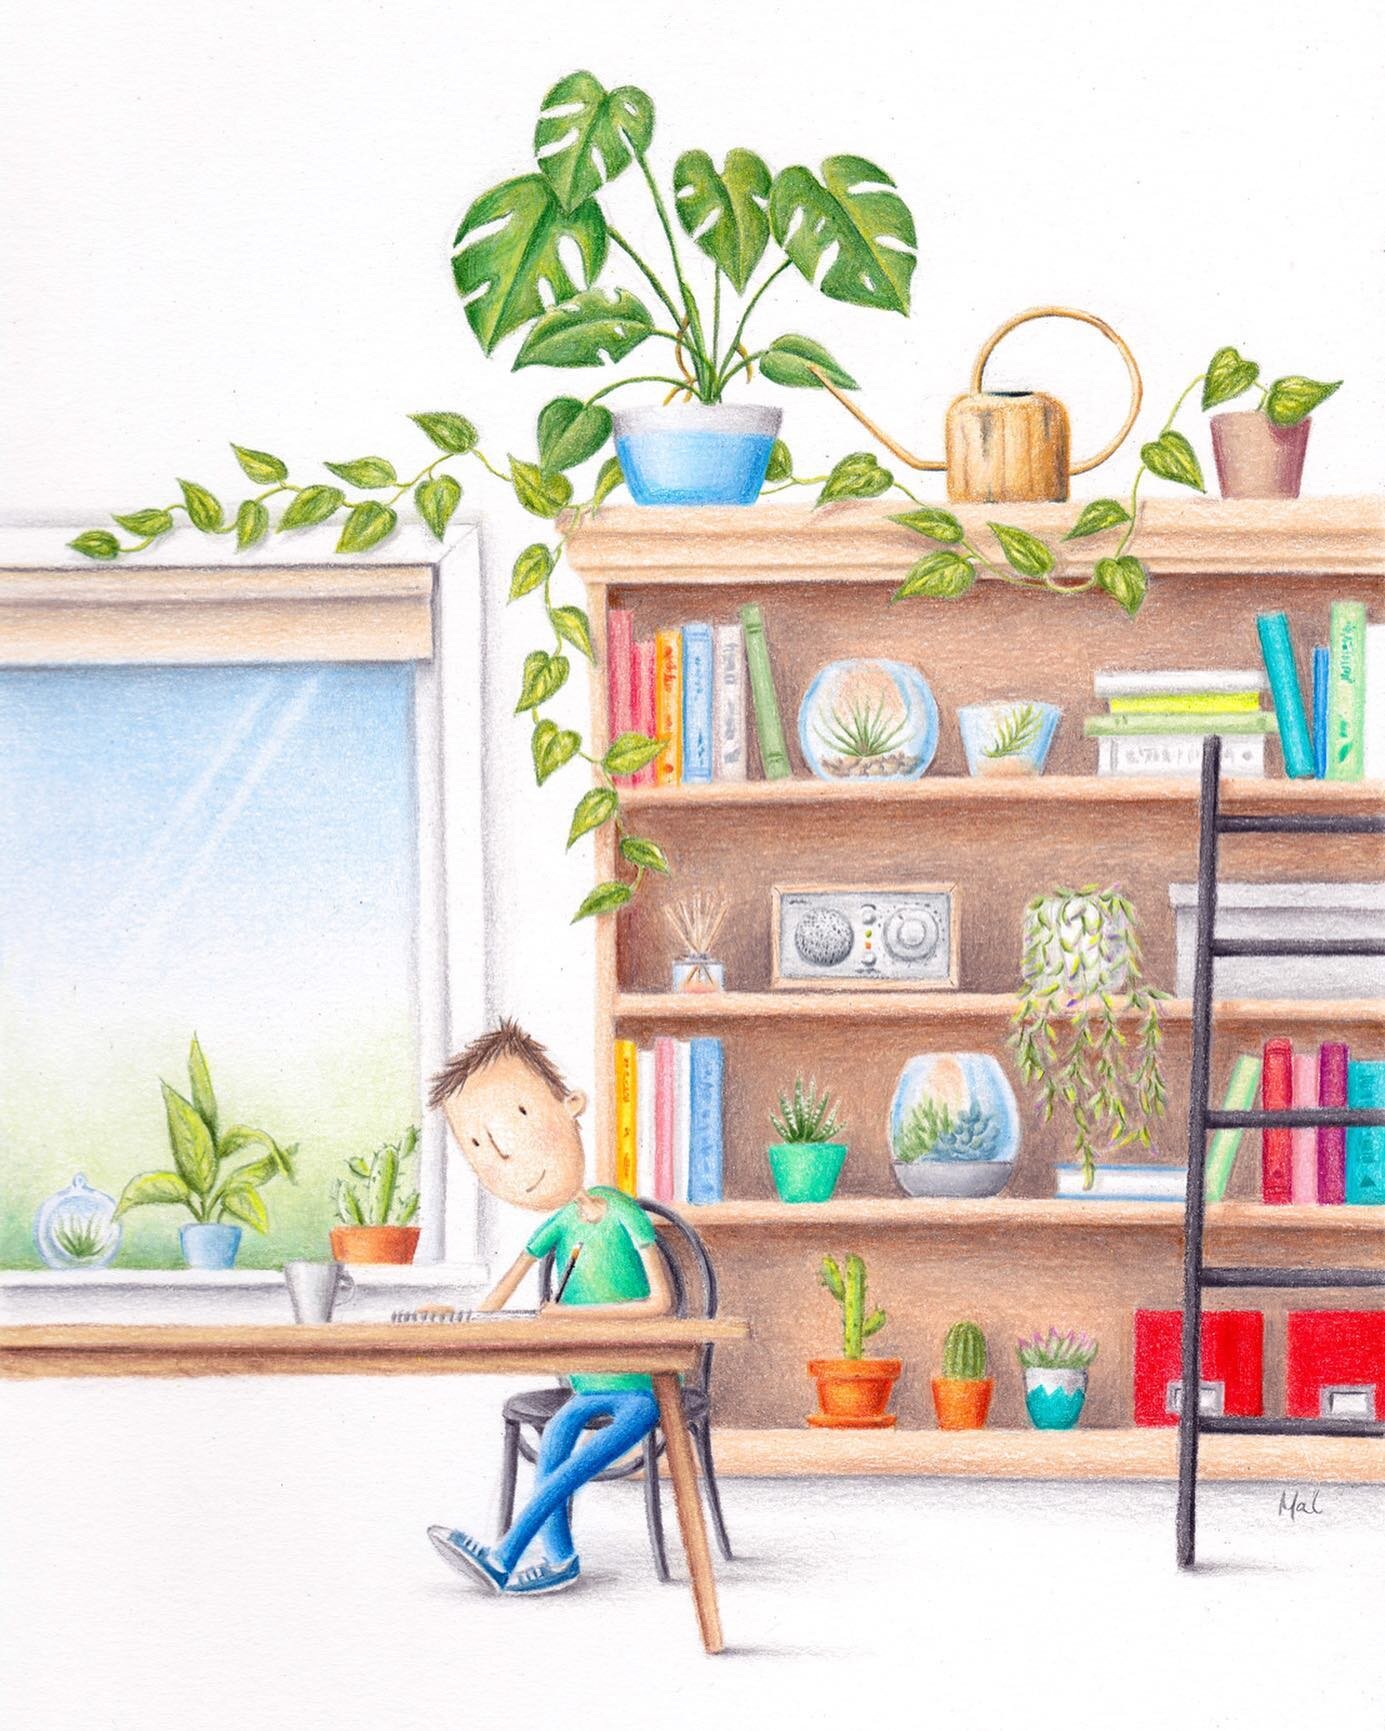 &ldquo;If you have a garden and a library, you have everything you need.&rdquo; - Cicero

This quote from Cicero inspired this drawing, and how true it is. 

In terms of creating this piece there&rsquo;s no digital trickery here, just a tin of colour